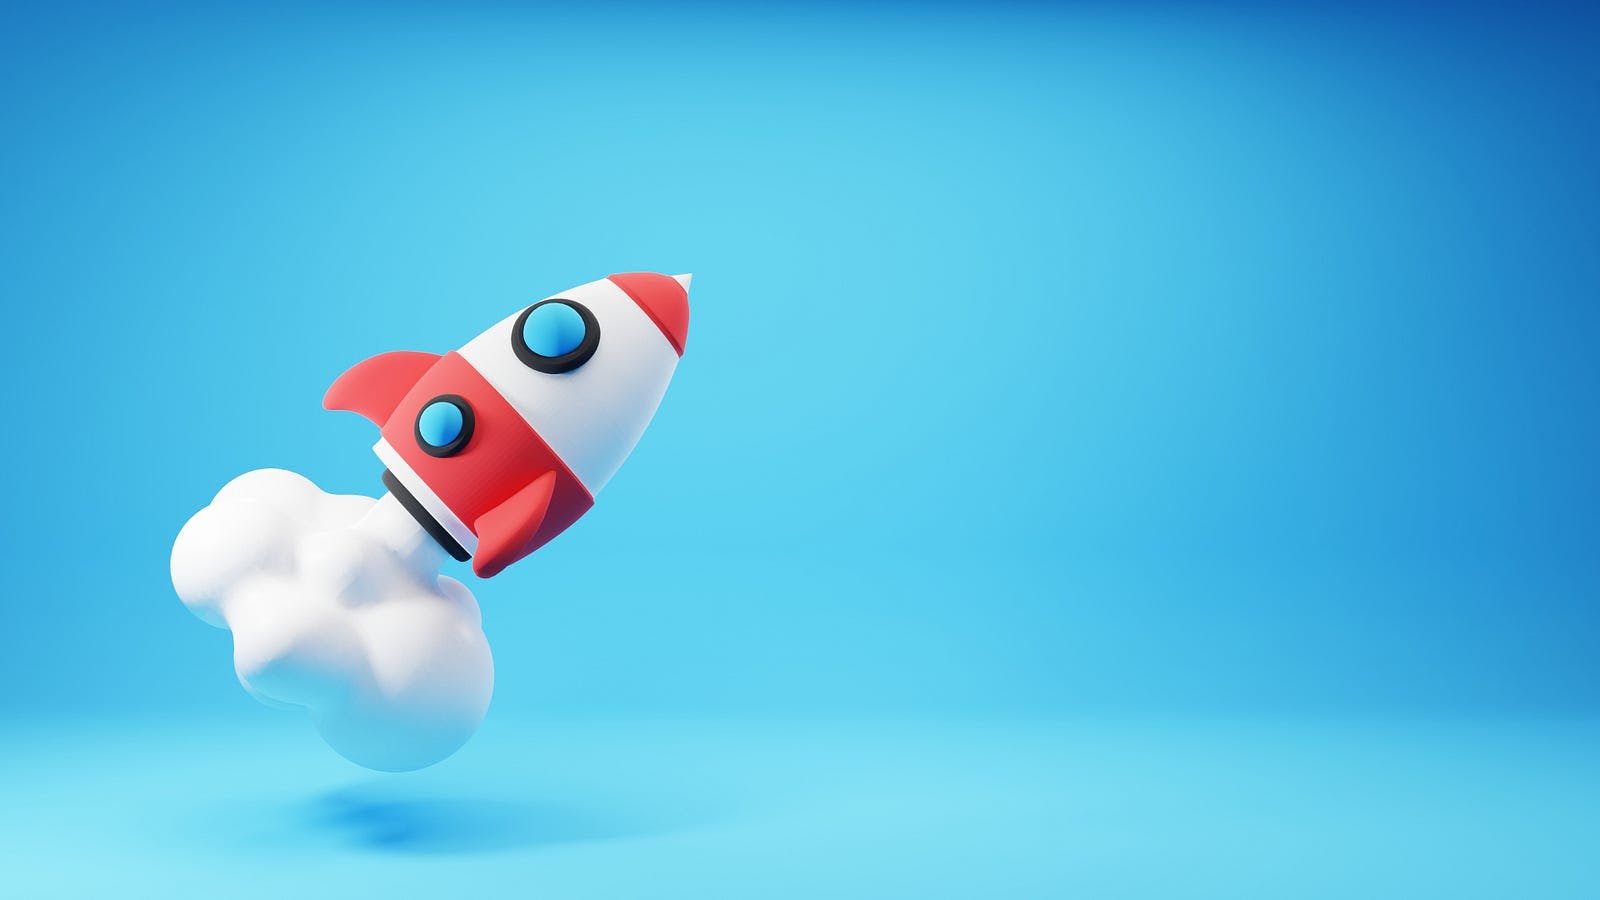 A red and white toy rocket ship flying through the air on a blue background with a white cloud in the foreground